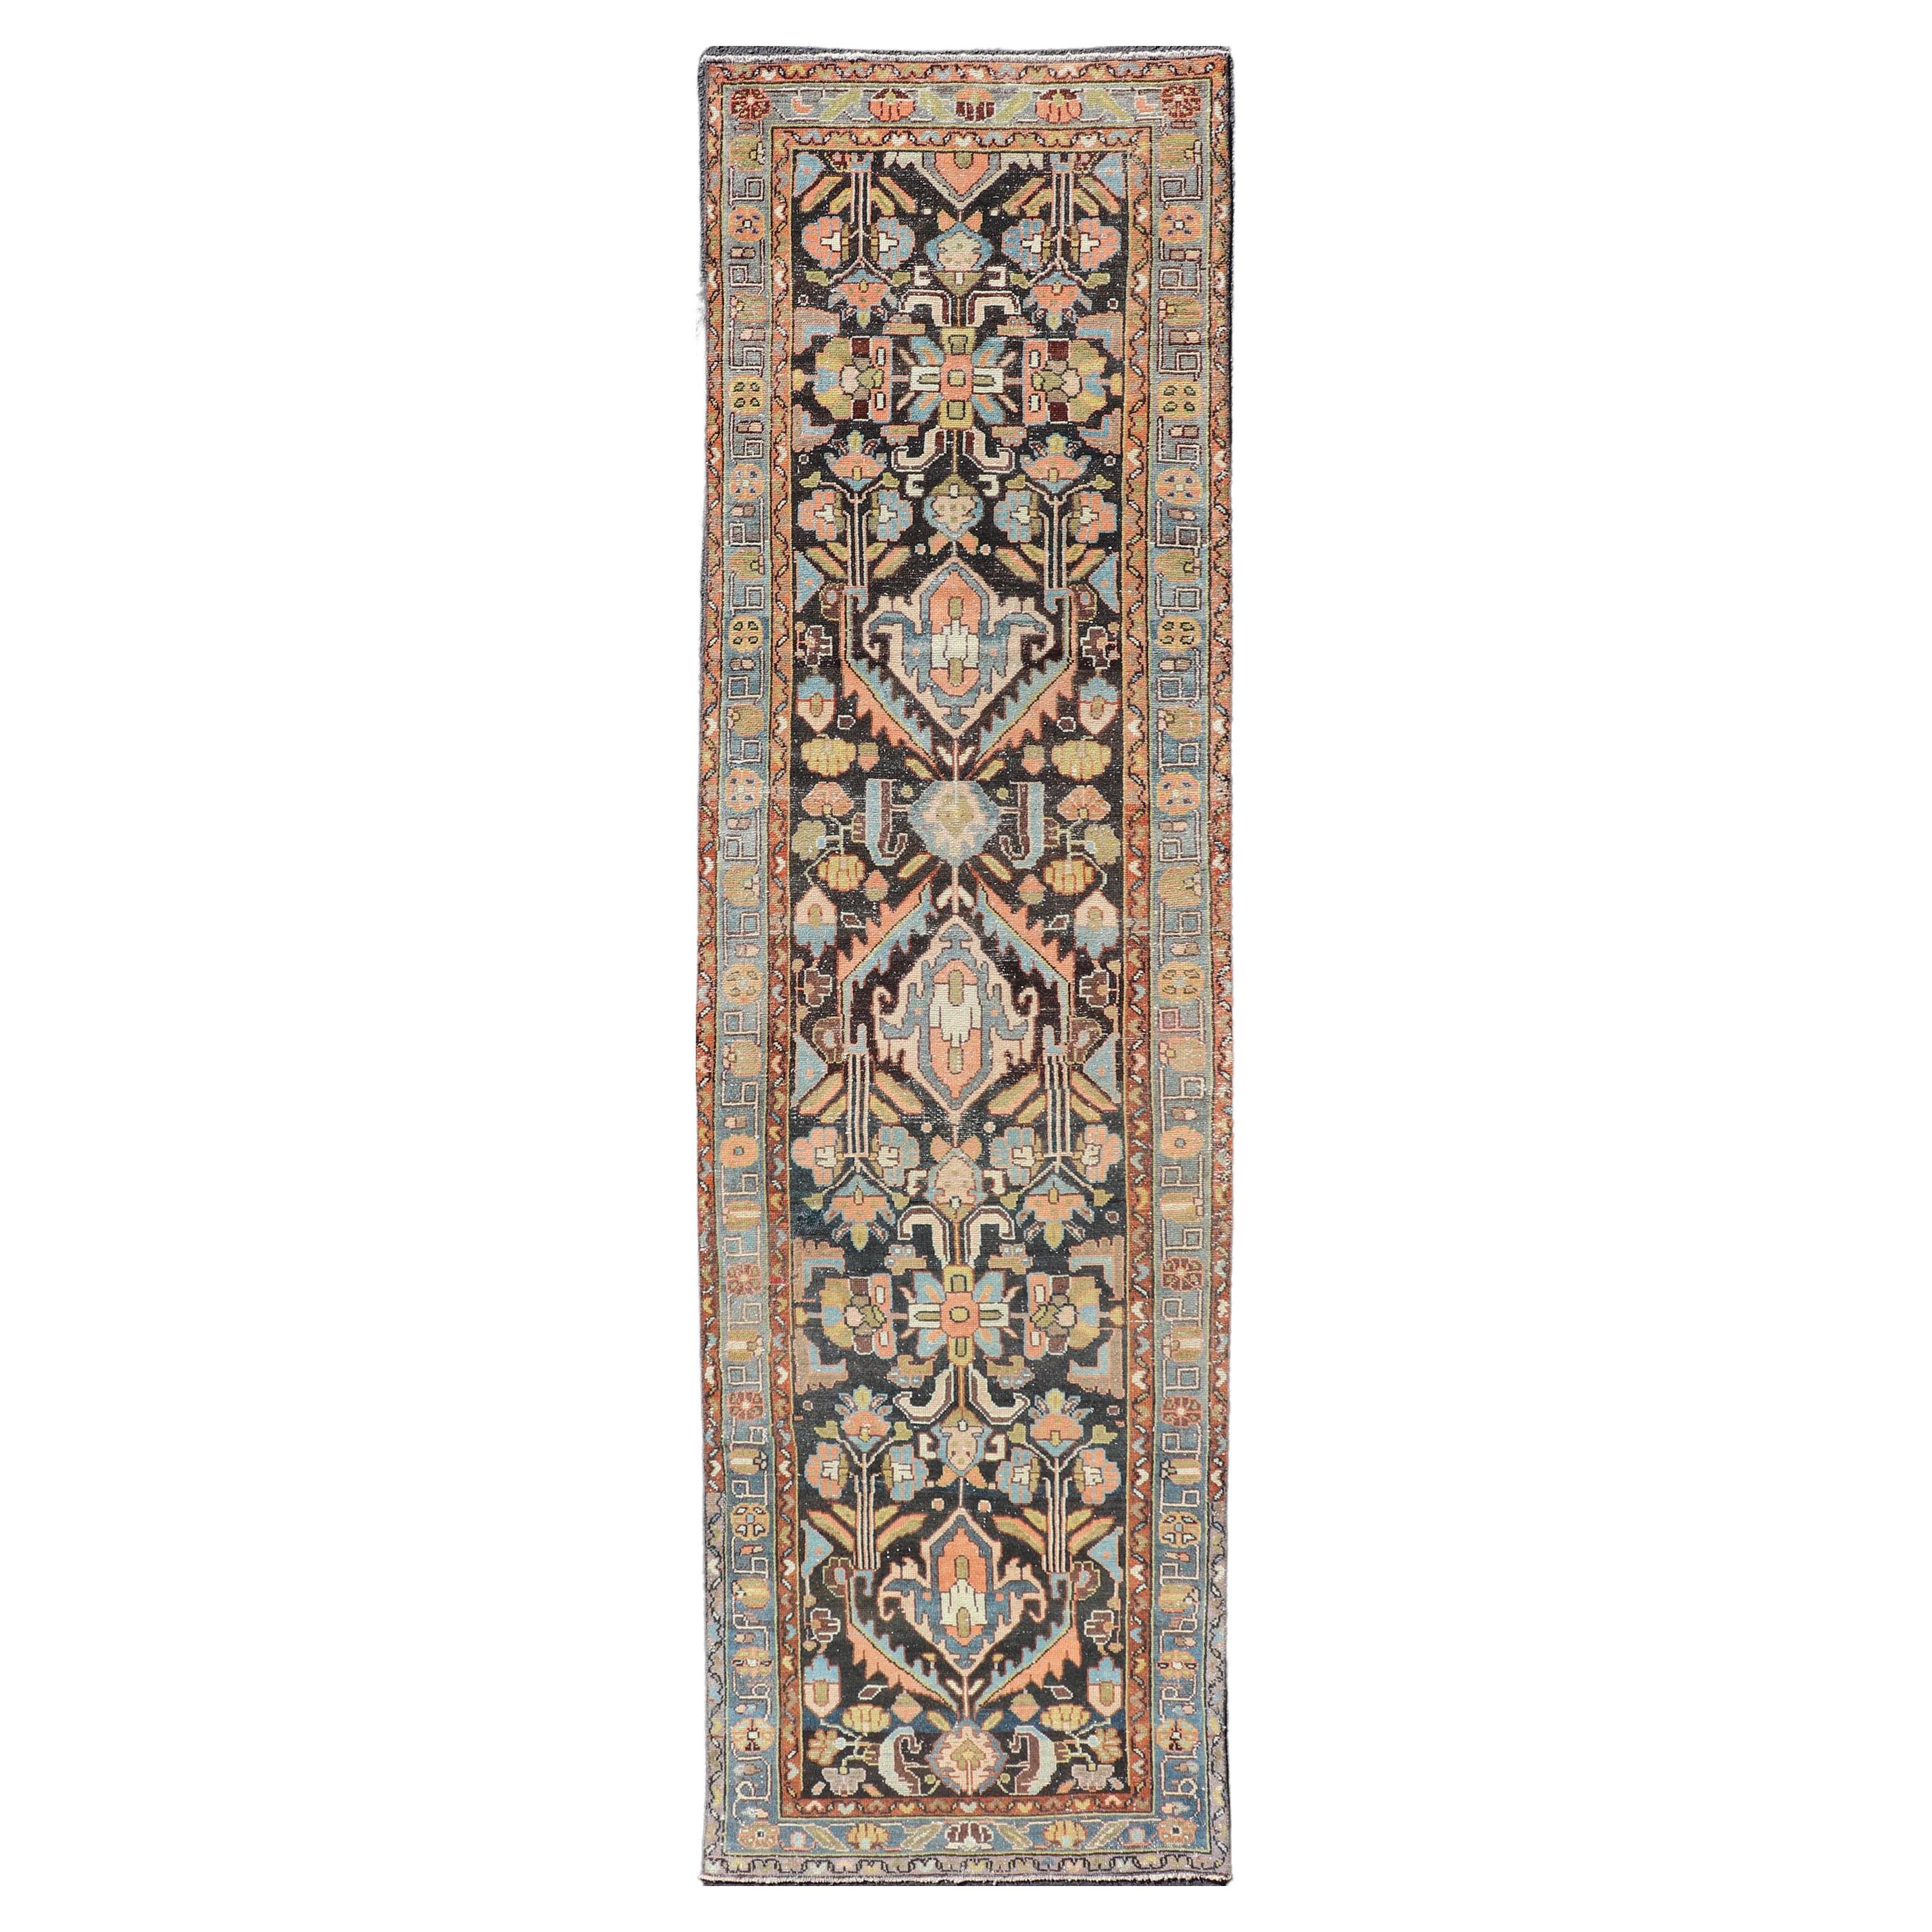 Antique Persian Hamedan Runner With Tribal Motifs in Pastel Colors For Sale